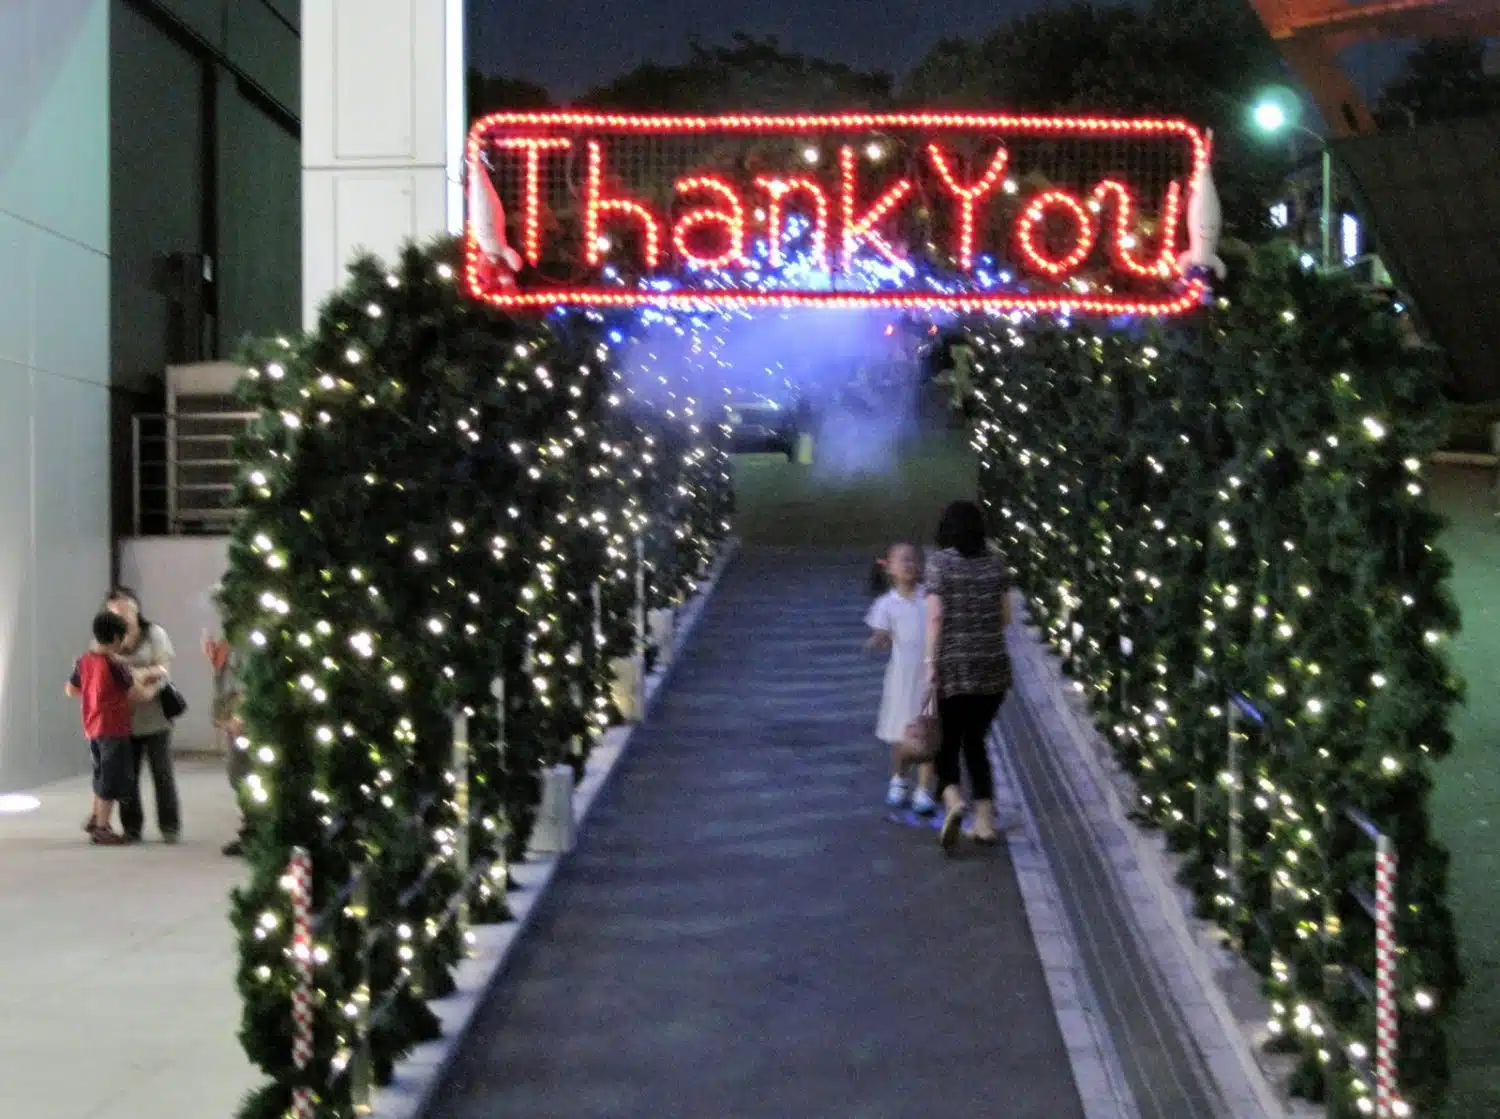 A lit-up "Thank You" sign.